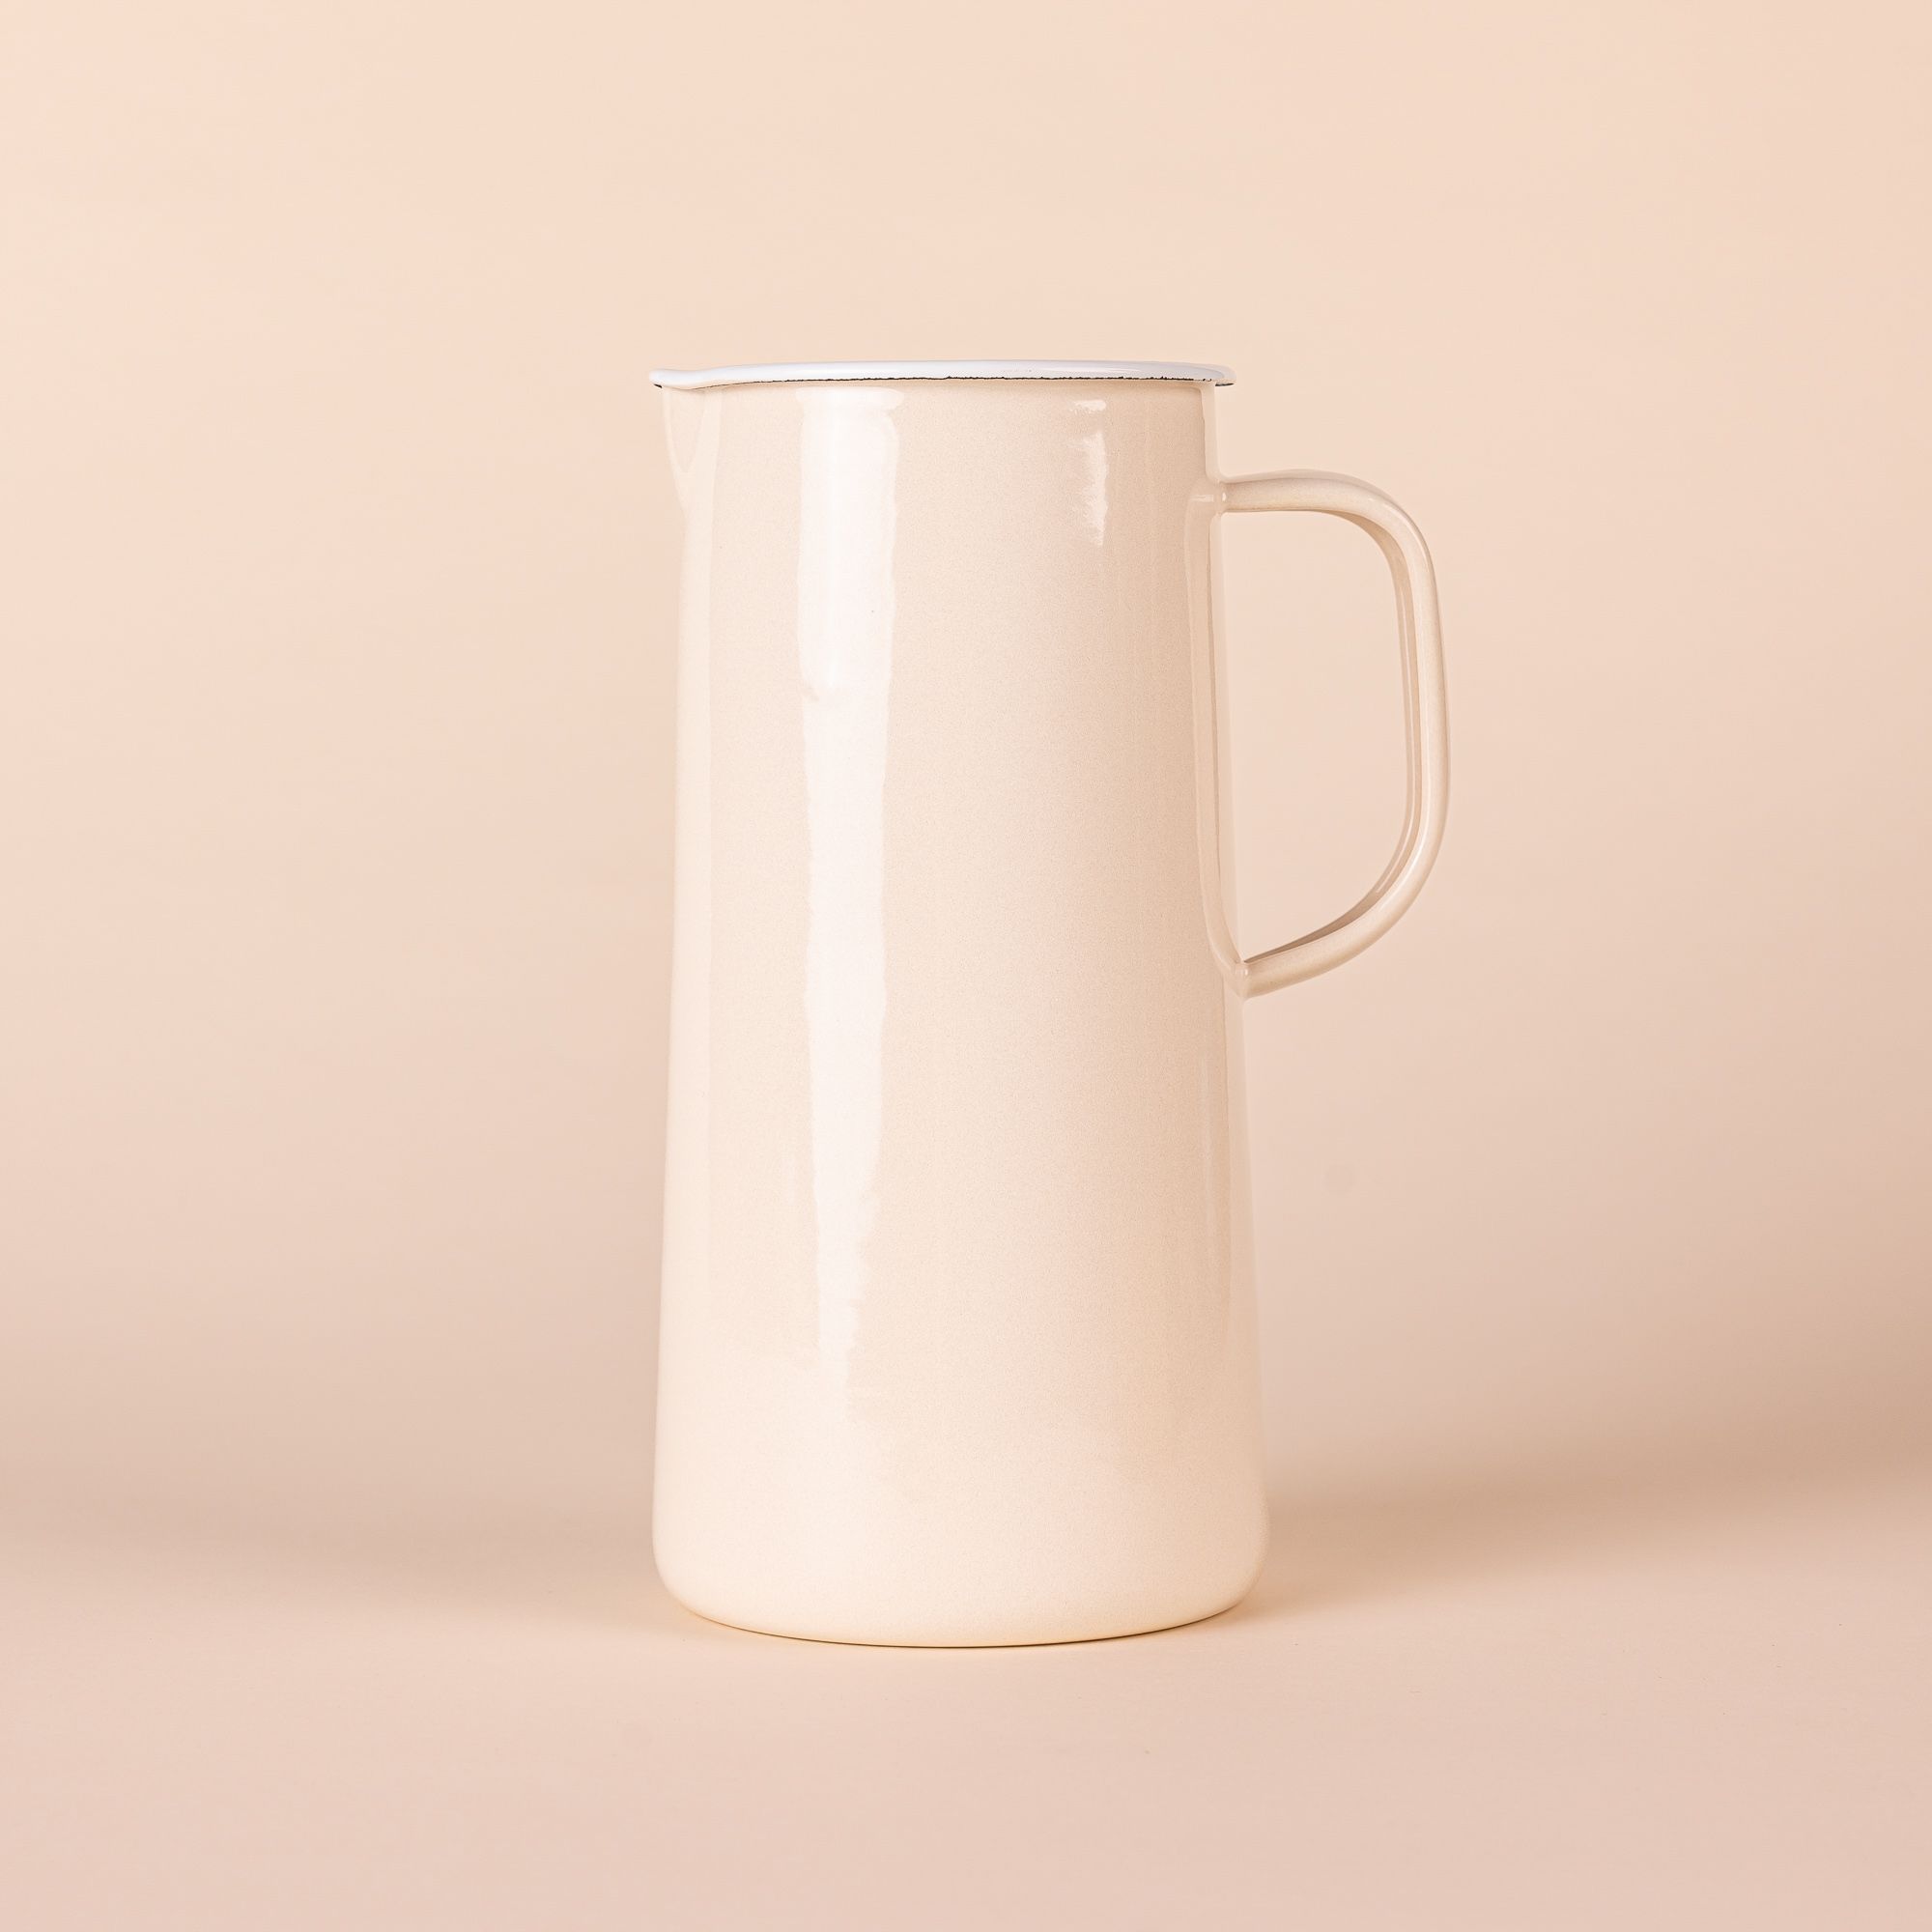 Shiny cream cylindrical jug, with white interior, a spout on the left, and a handle on the right